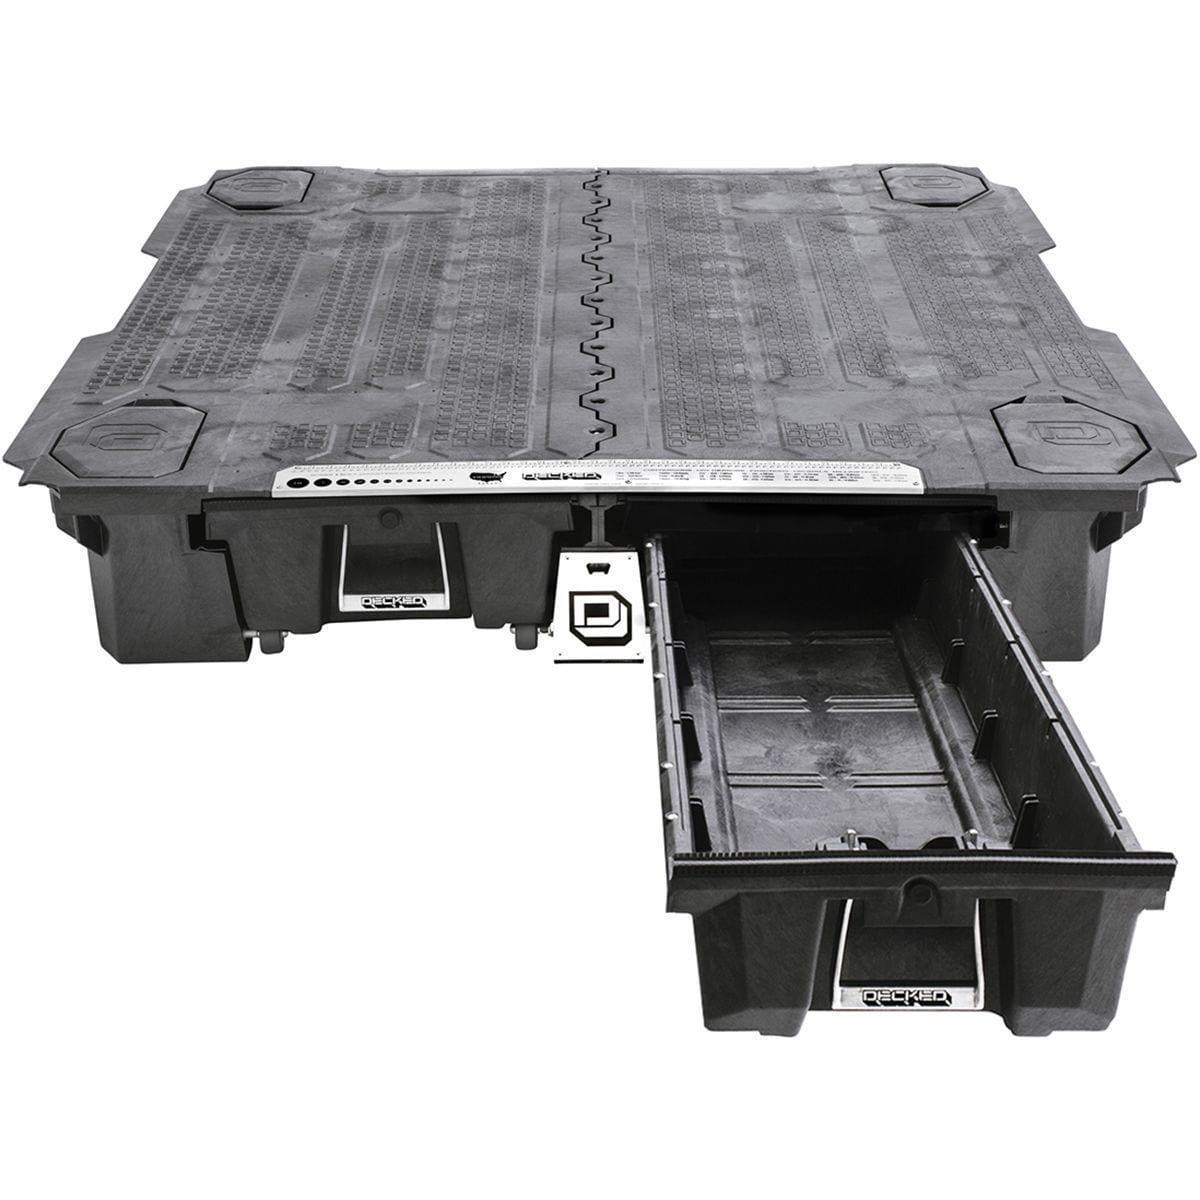 Decked Toyota Truck Bed System